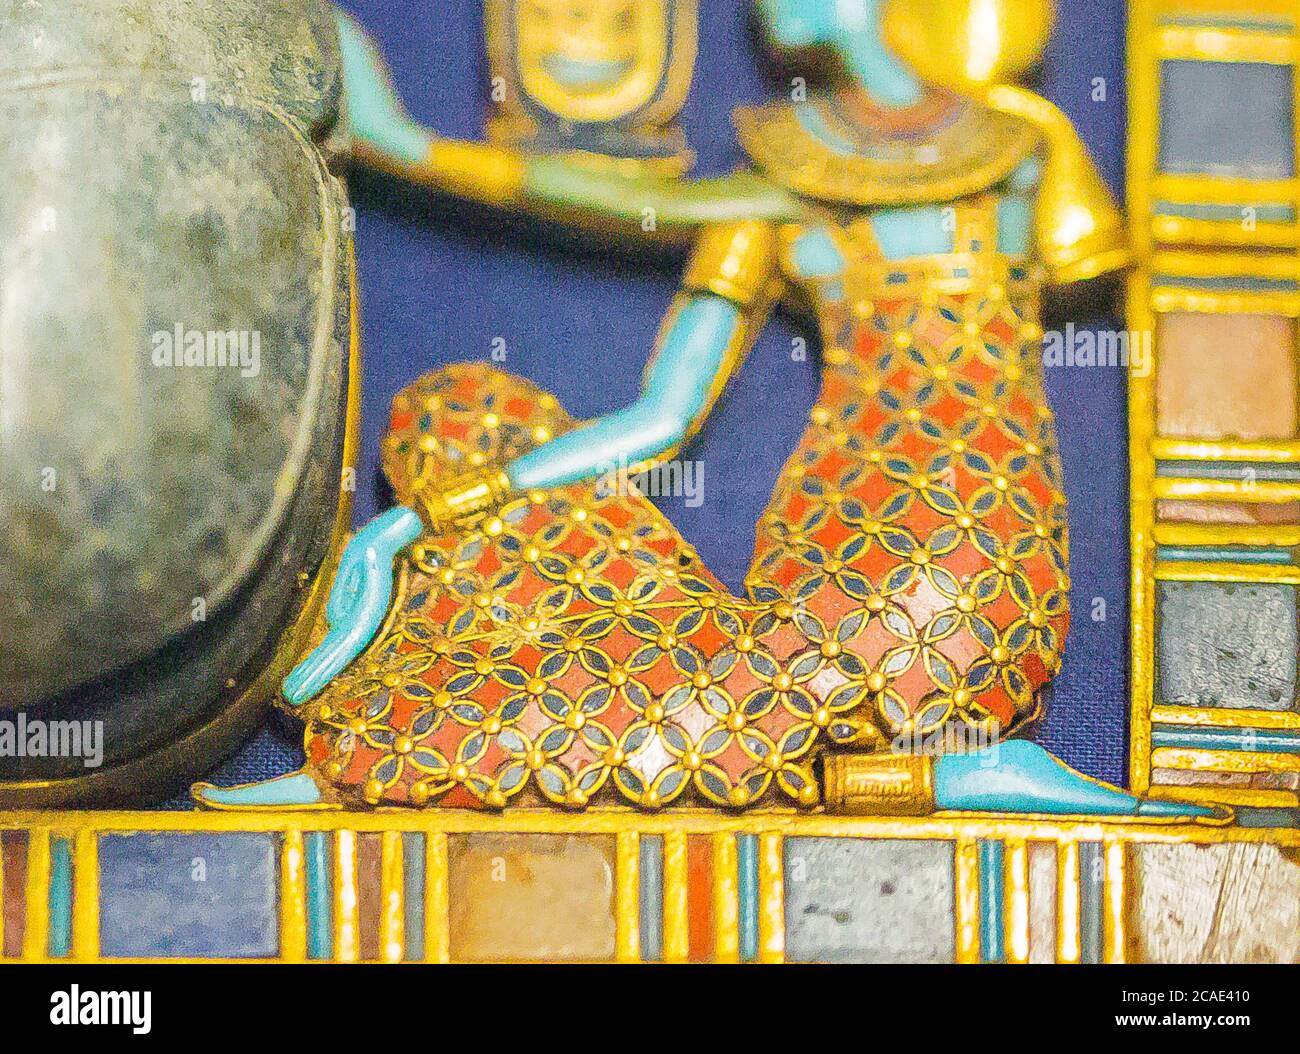 Egypt, Cairo, Tutankhamon jewellery, from his tomb in Luxor, detail of a pectoral : Dress, bracelets and fishnet. Stock Photo